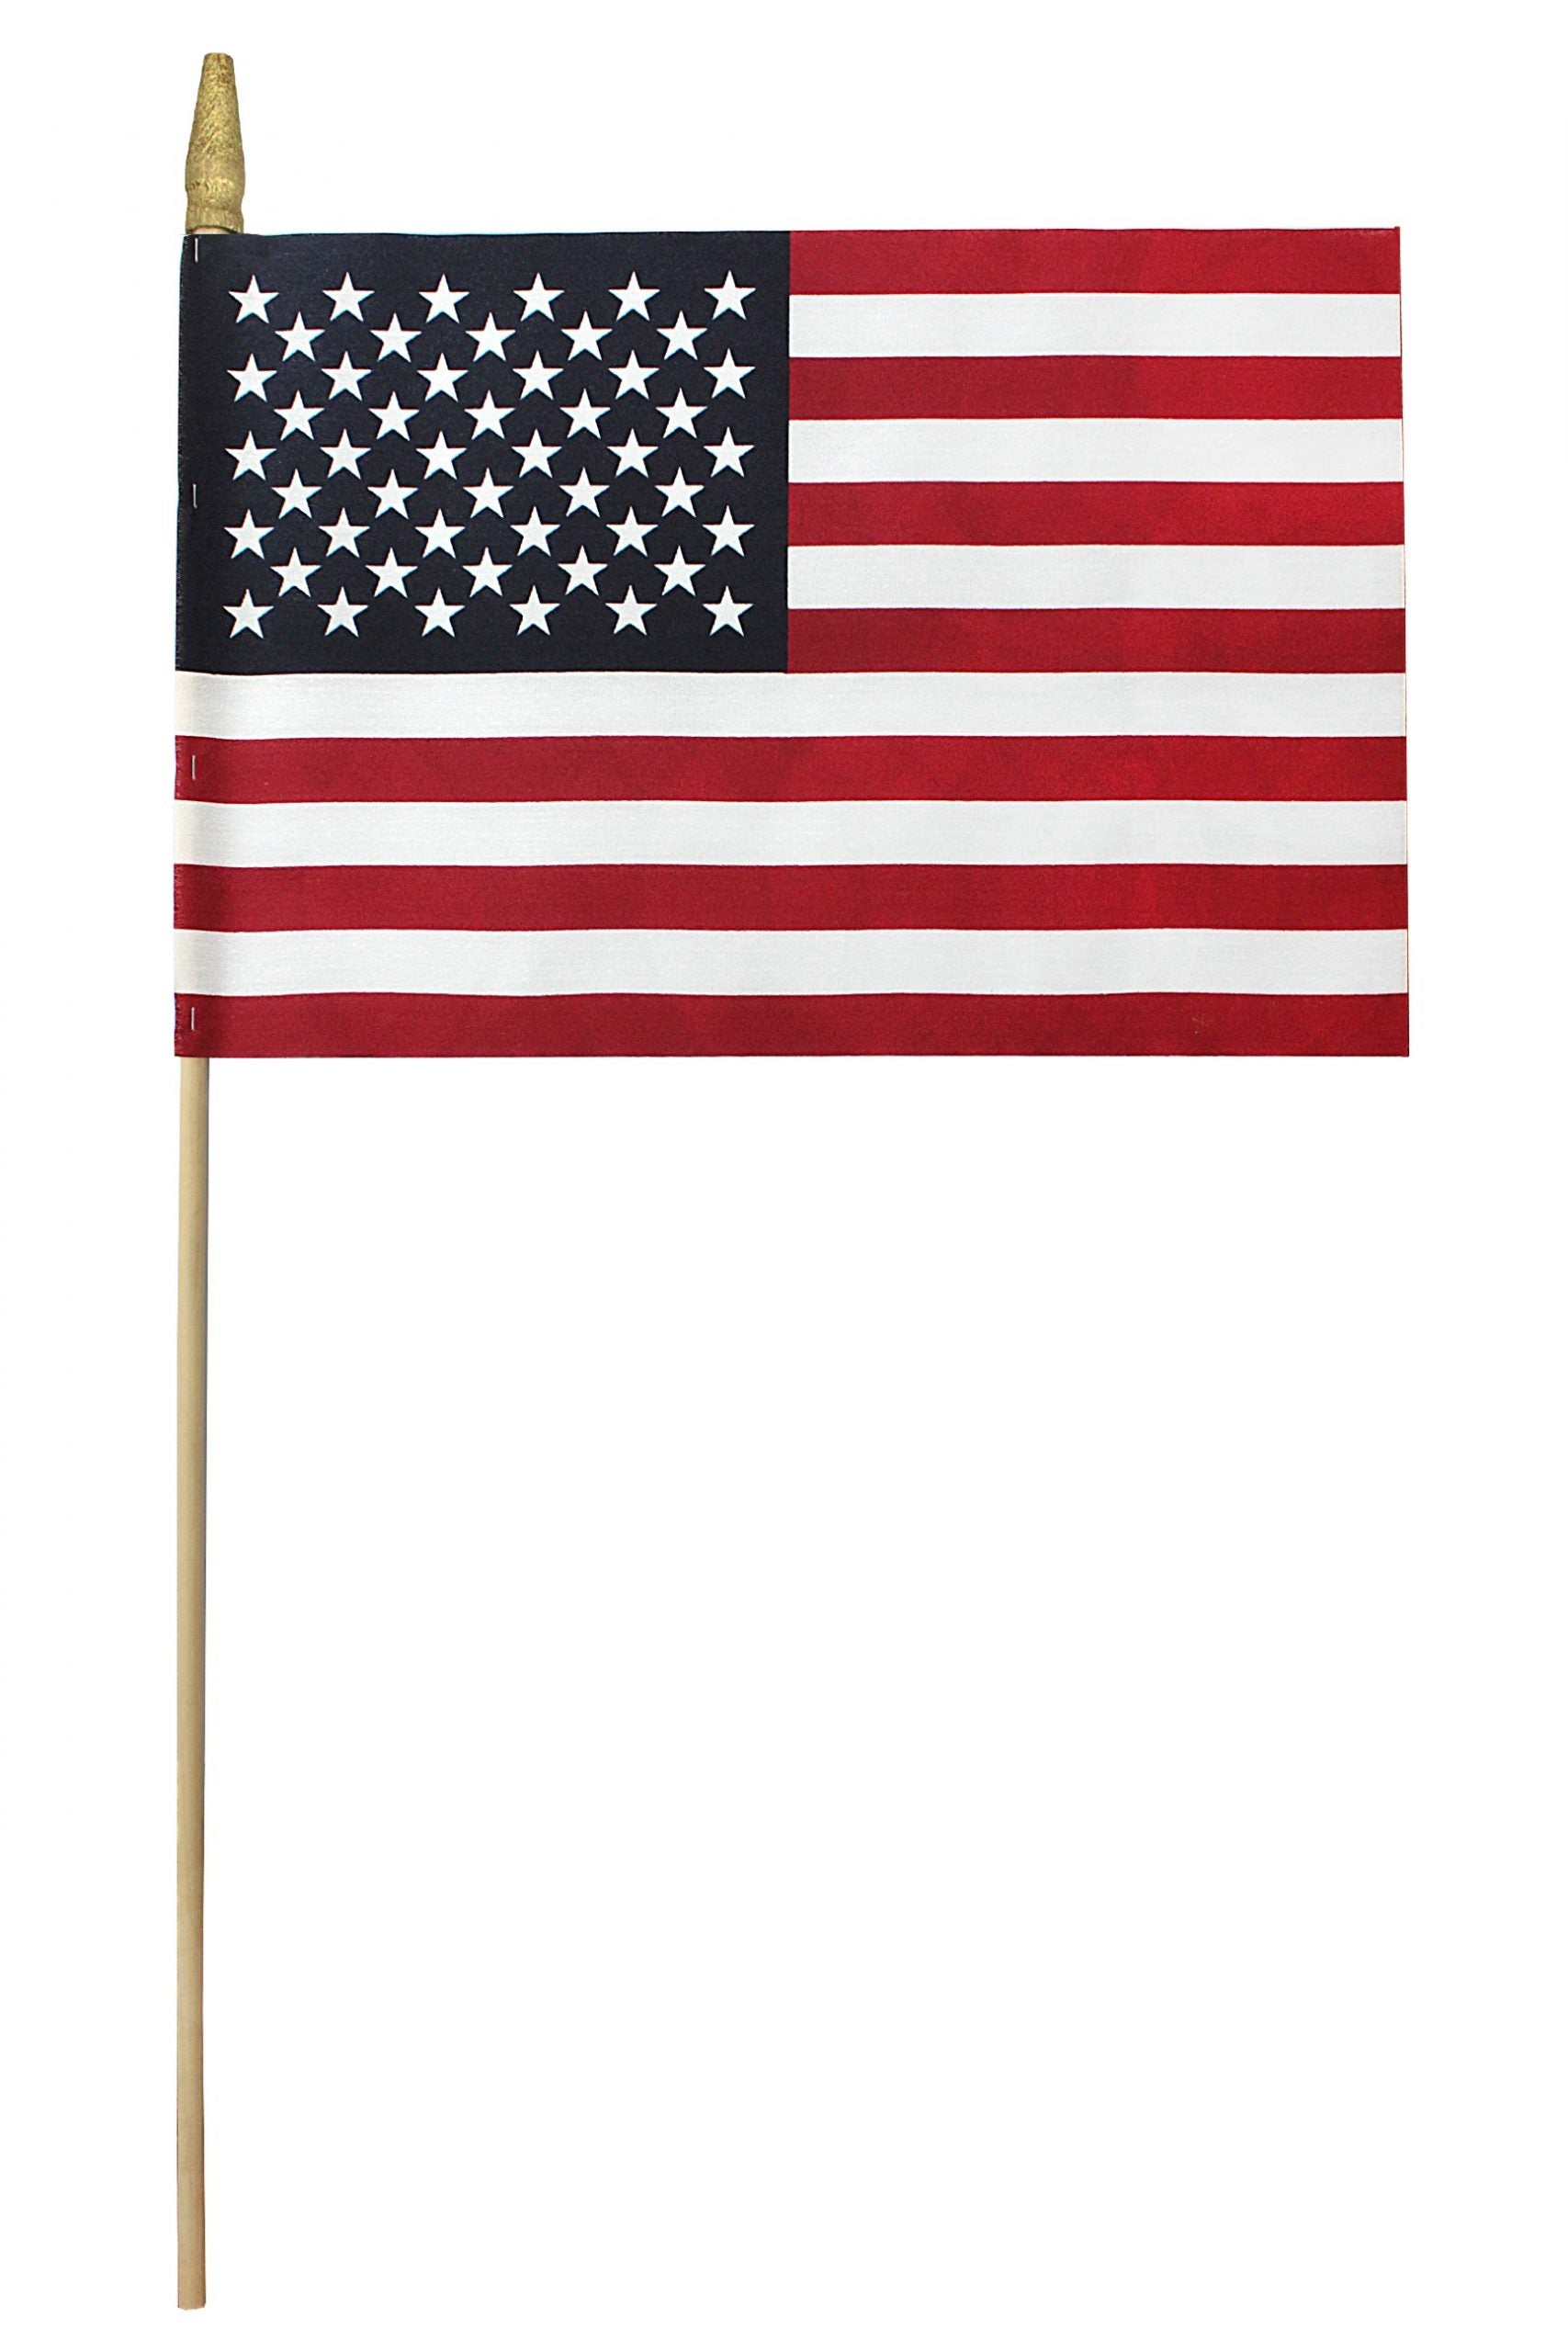 A product picture of a American Veteran Stick Flag 12" x 18" - NO HEM Cemetery Grave Marker Wood Dowel - Bundle of 144 Flags MADE IN THE USA Provided by Action Flag.